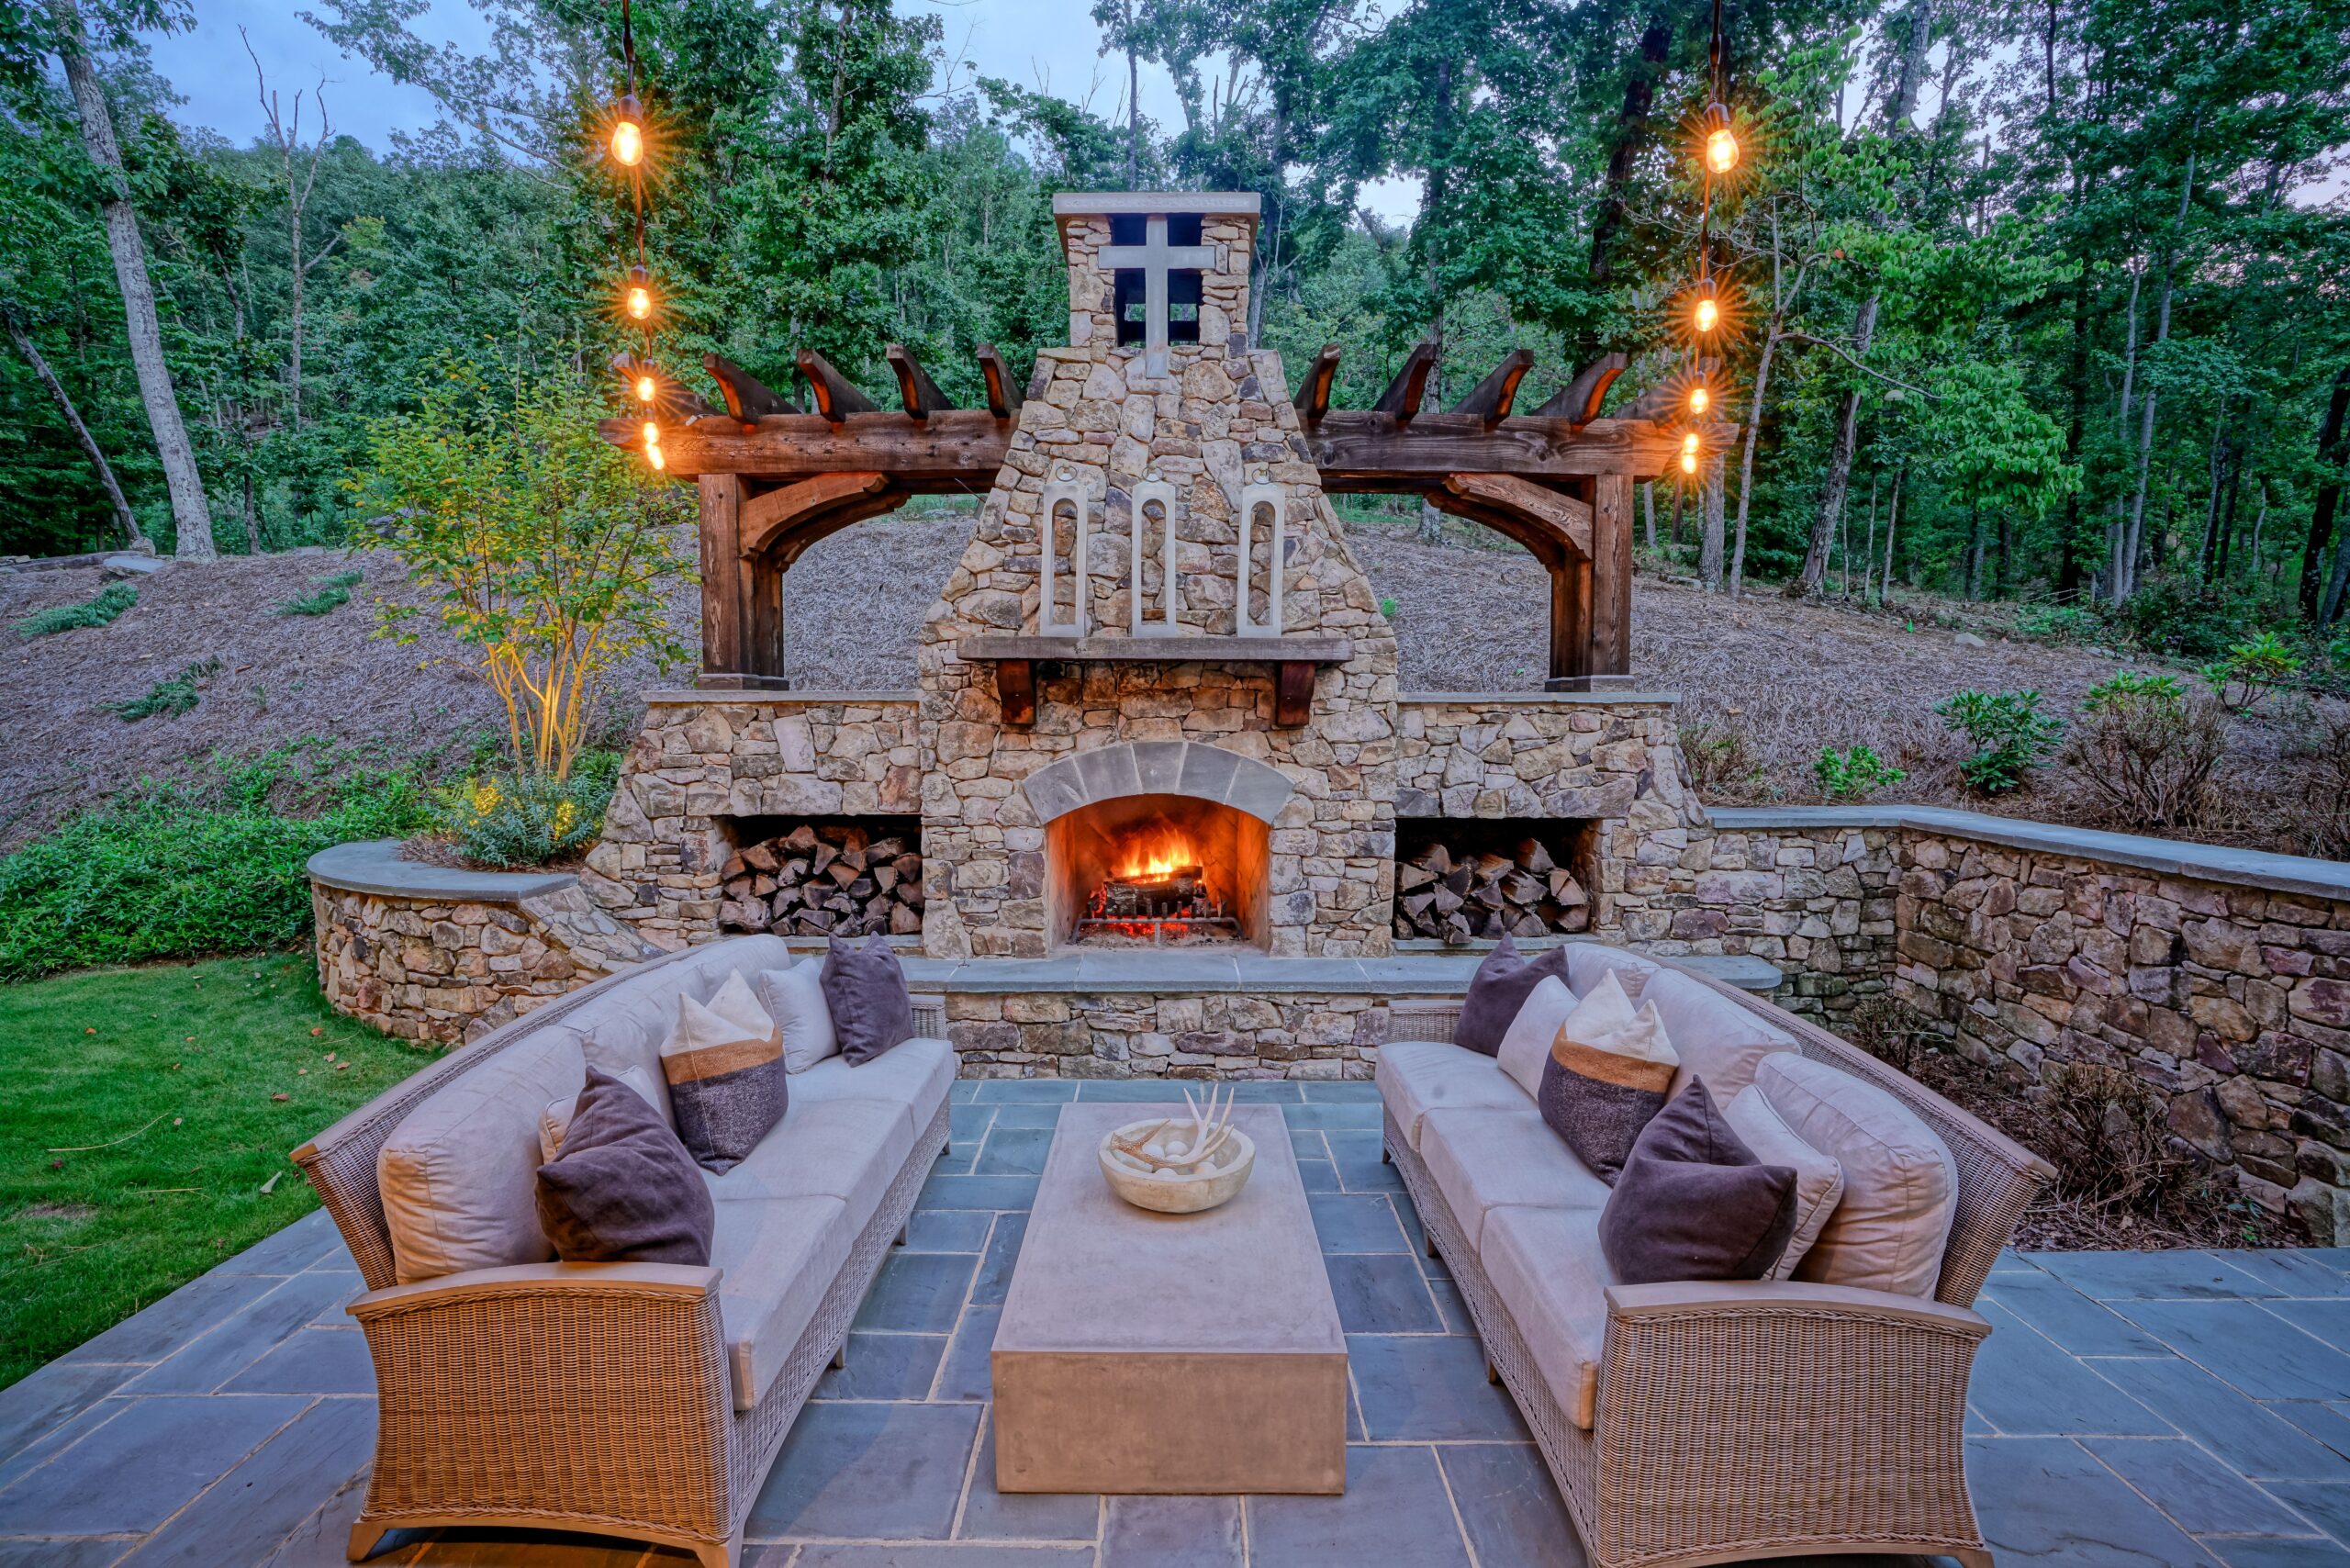 A stone patio with a fireplace and outdoor furniture.